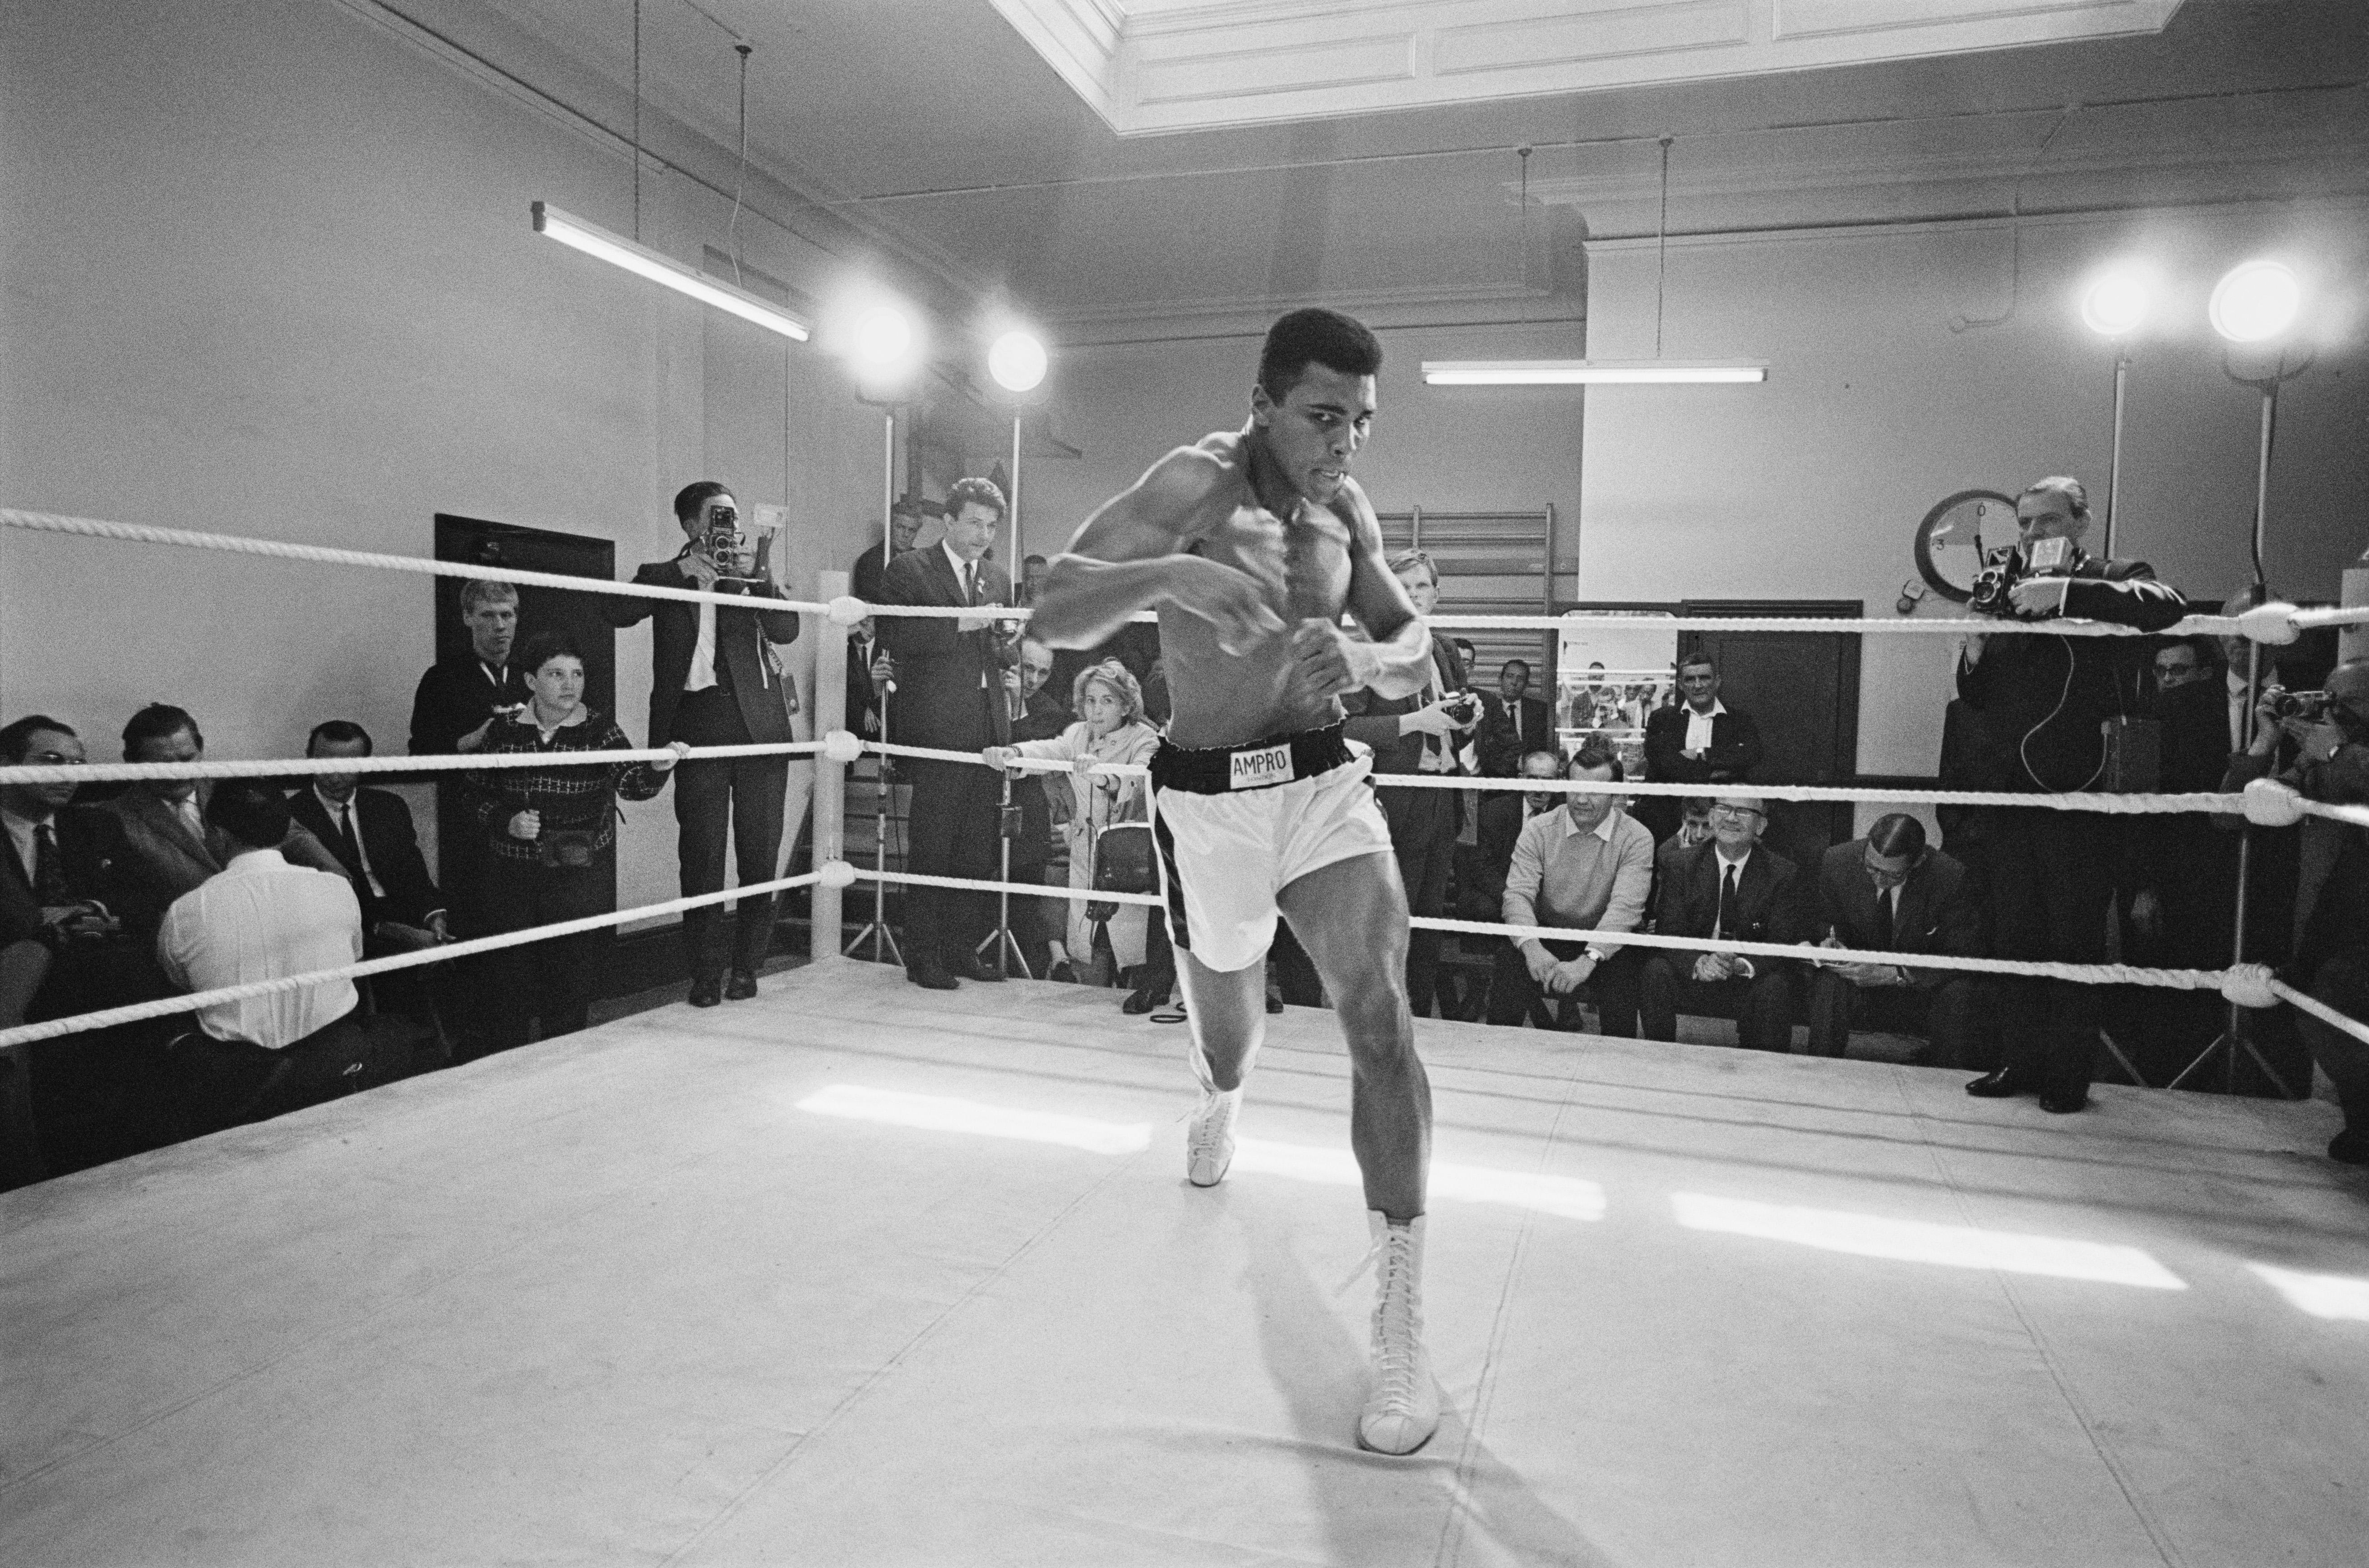 Unknown Black and White Photograph - 'Ali in Training' by R. McPhedran, Limited Edition Photograph Print, 20x24